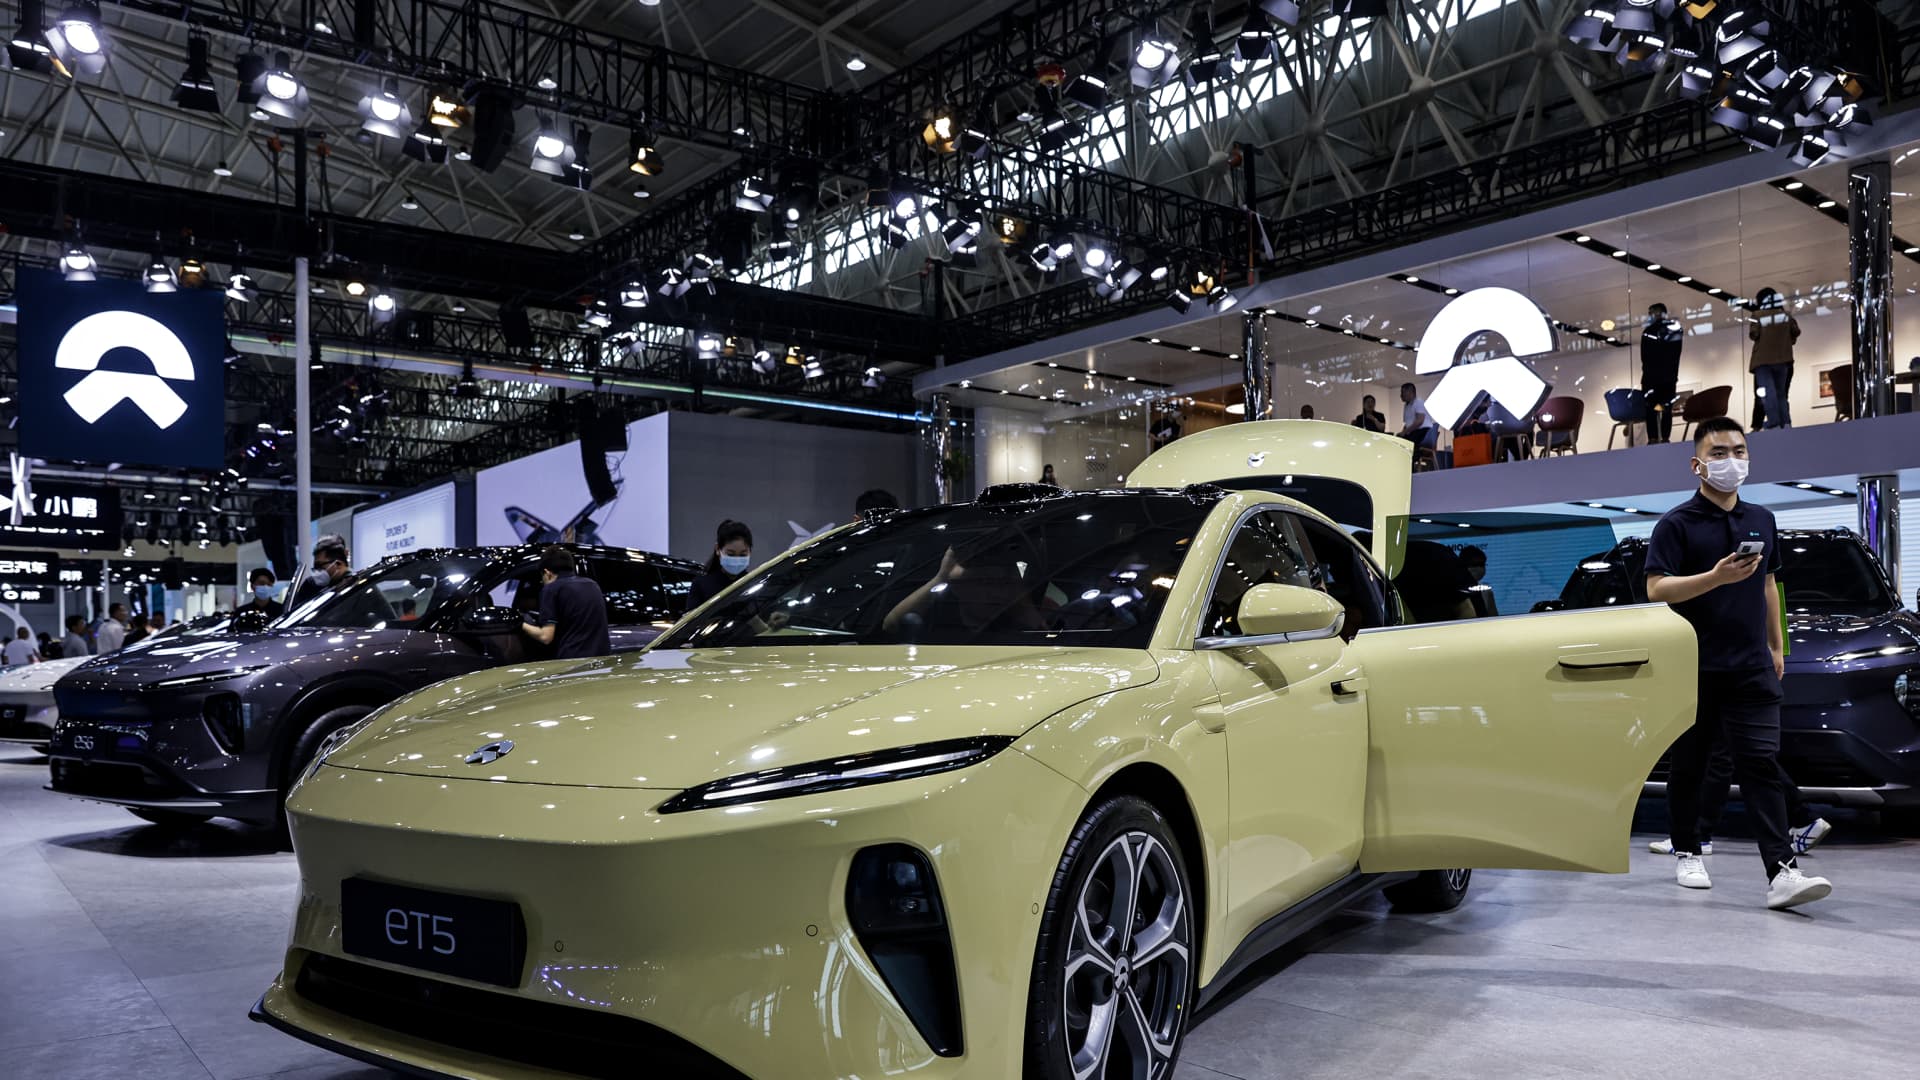 Chinese EV maker Nio raises more than 0 million in capital injection from Abu Dhabi